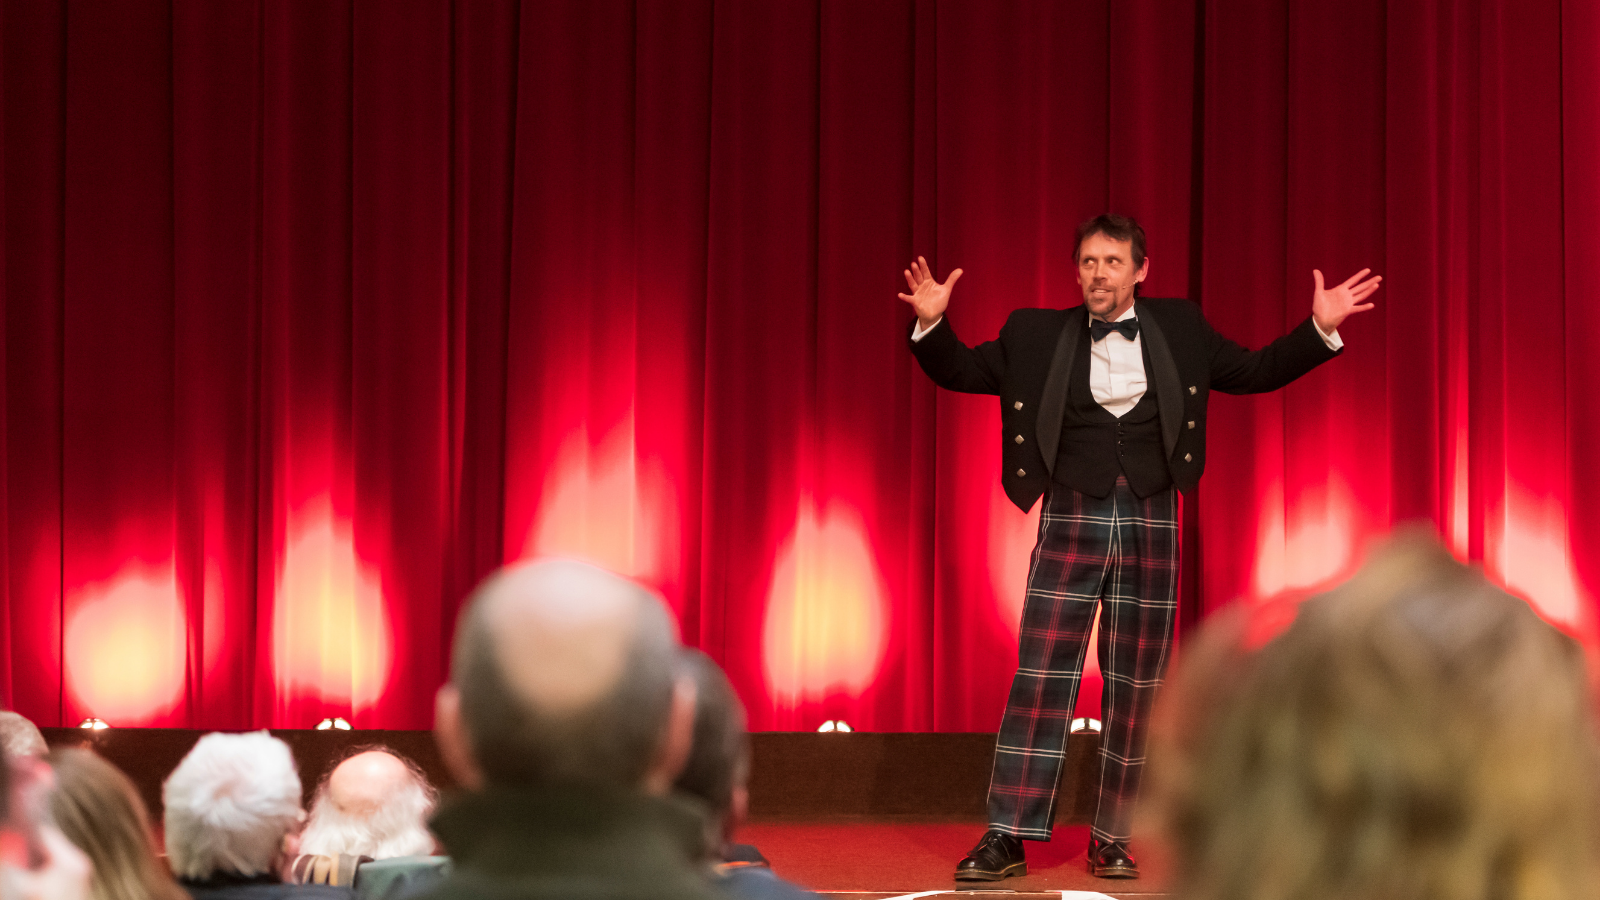 A man in a three piece suit with tartan trousers (Andy Cannon) performs on a stage in front of a pair of closed red curtains. In the foreground are the back of the heads of people watching him.